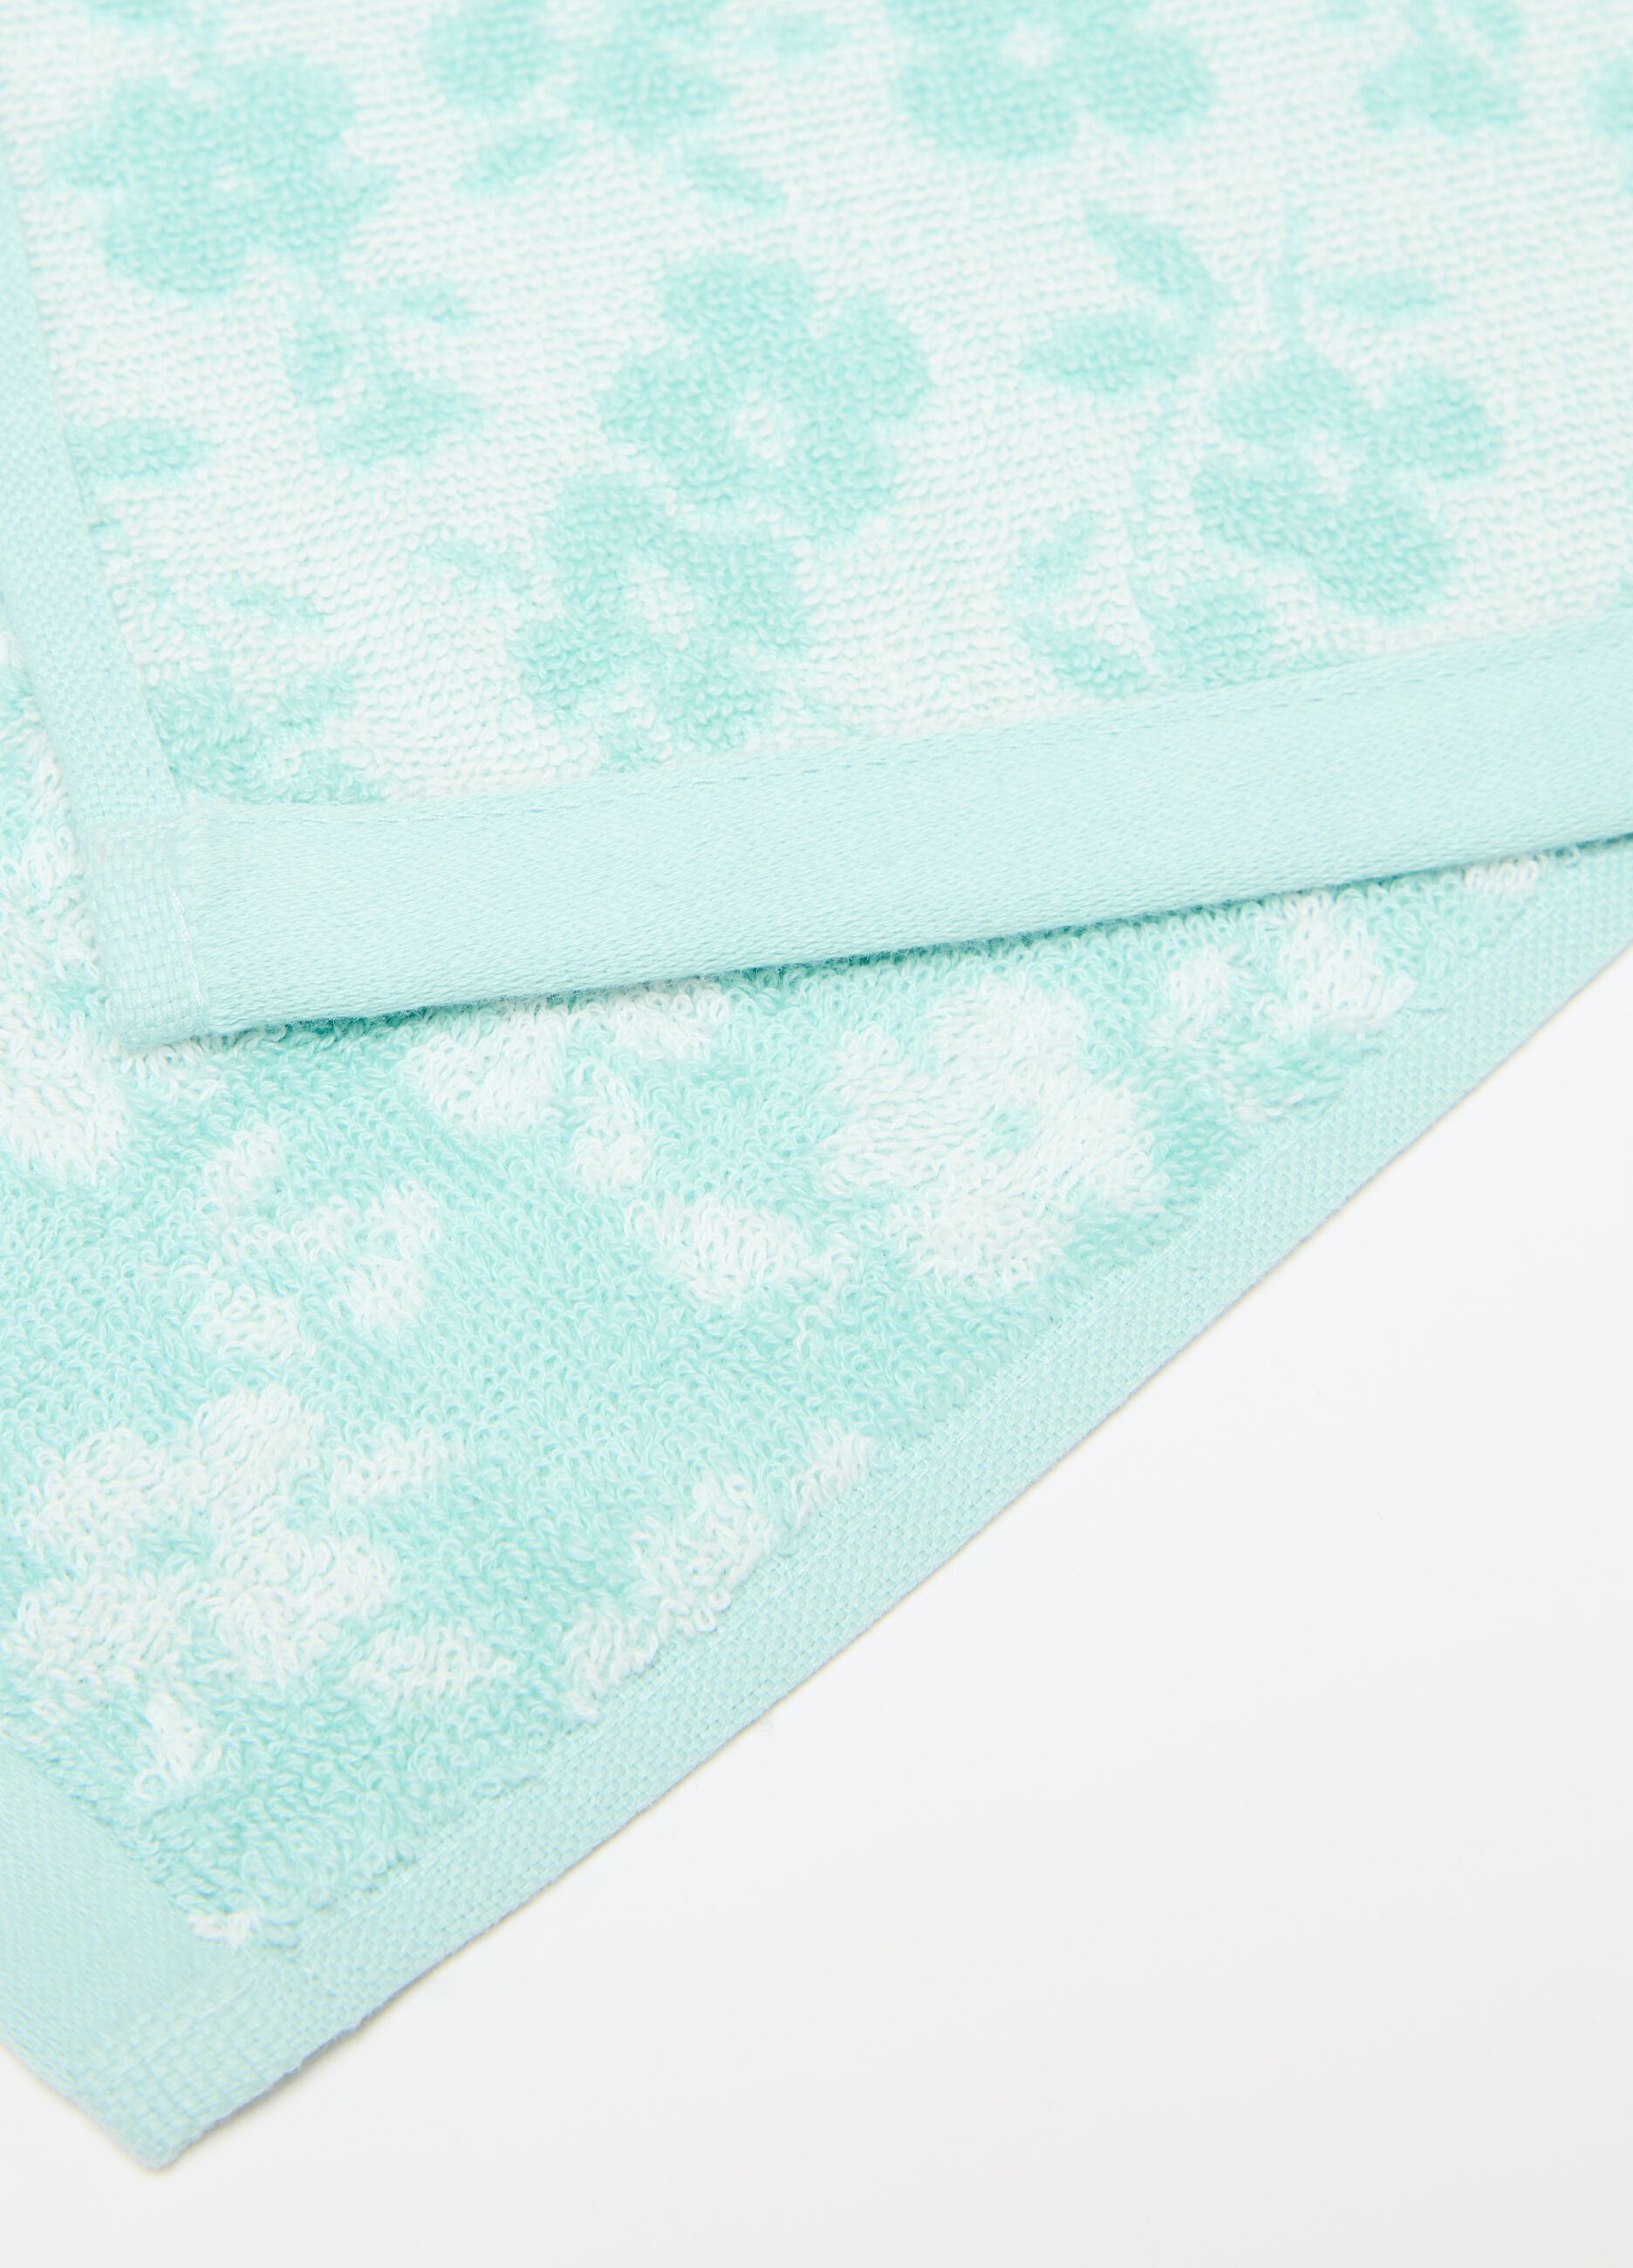 Guest towel with flowers pattern